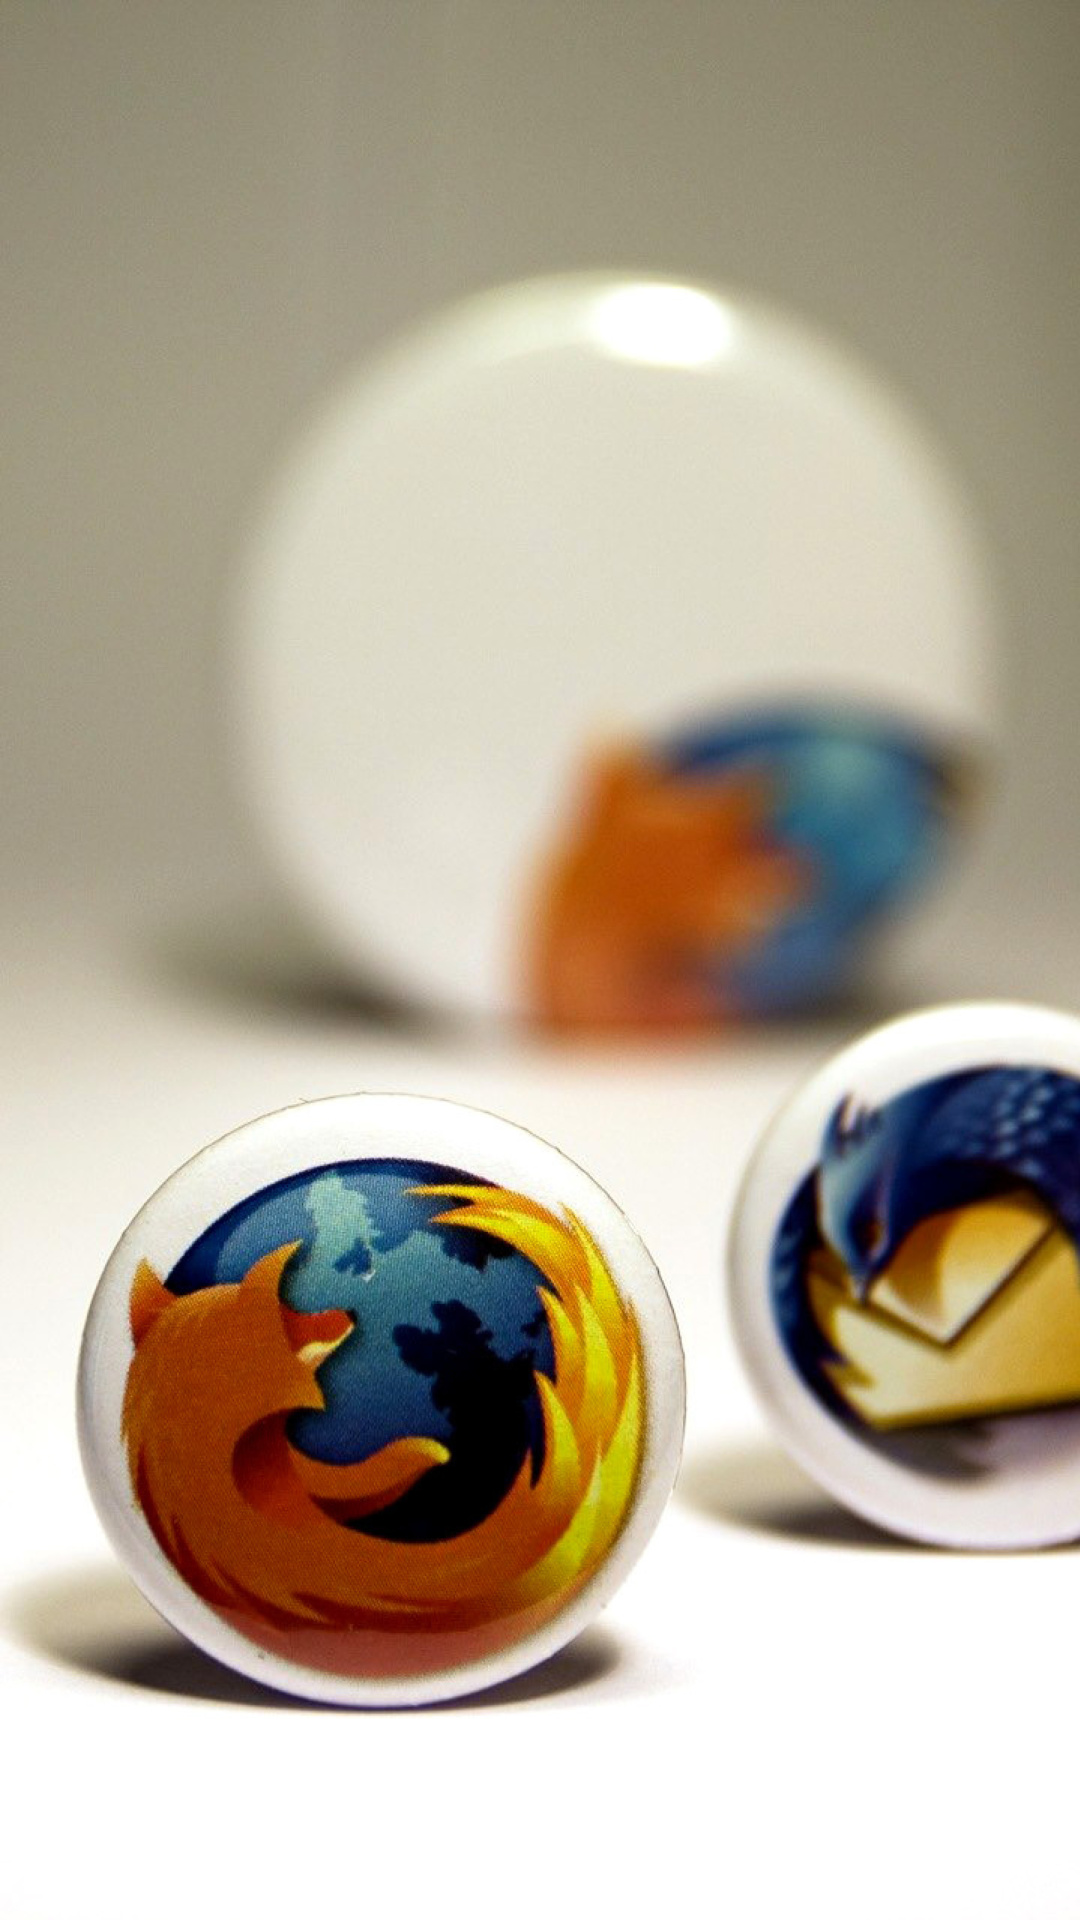 Firefox Browser Icons wallpaper 1080x1920